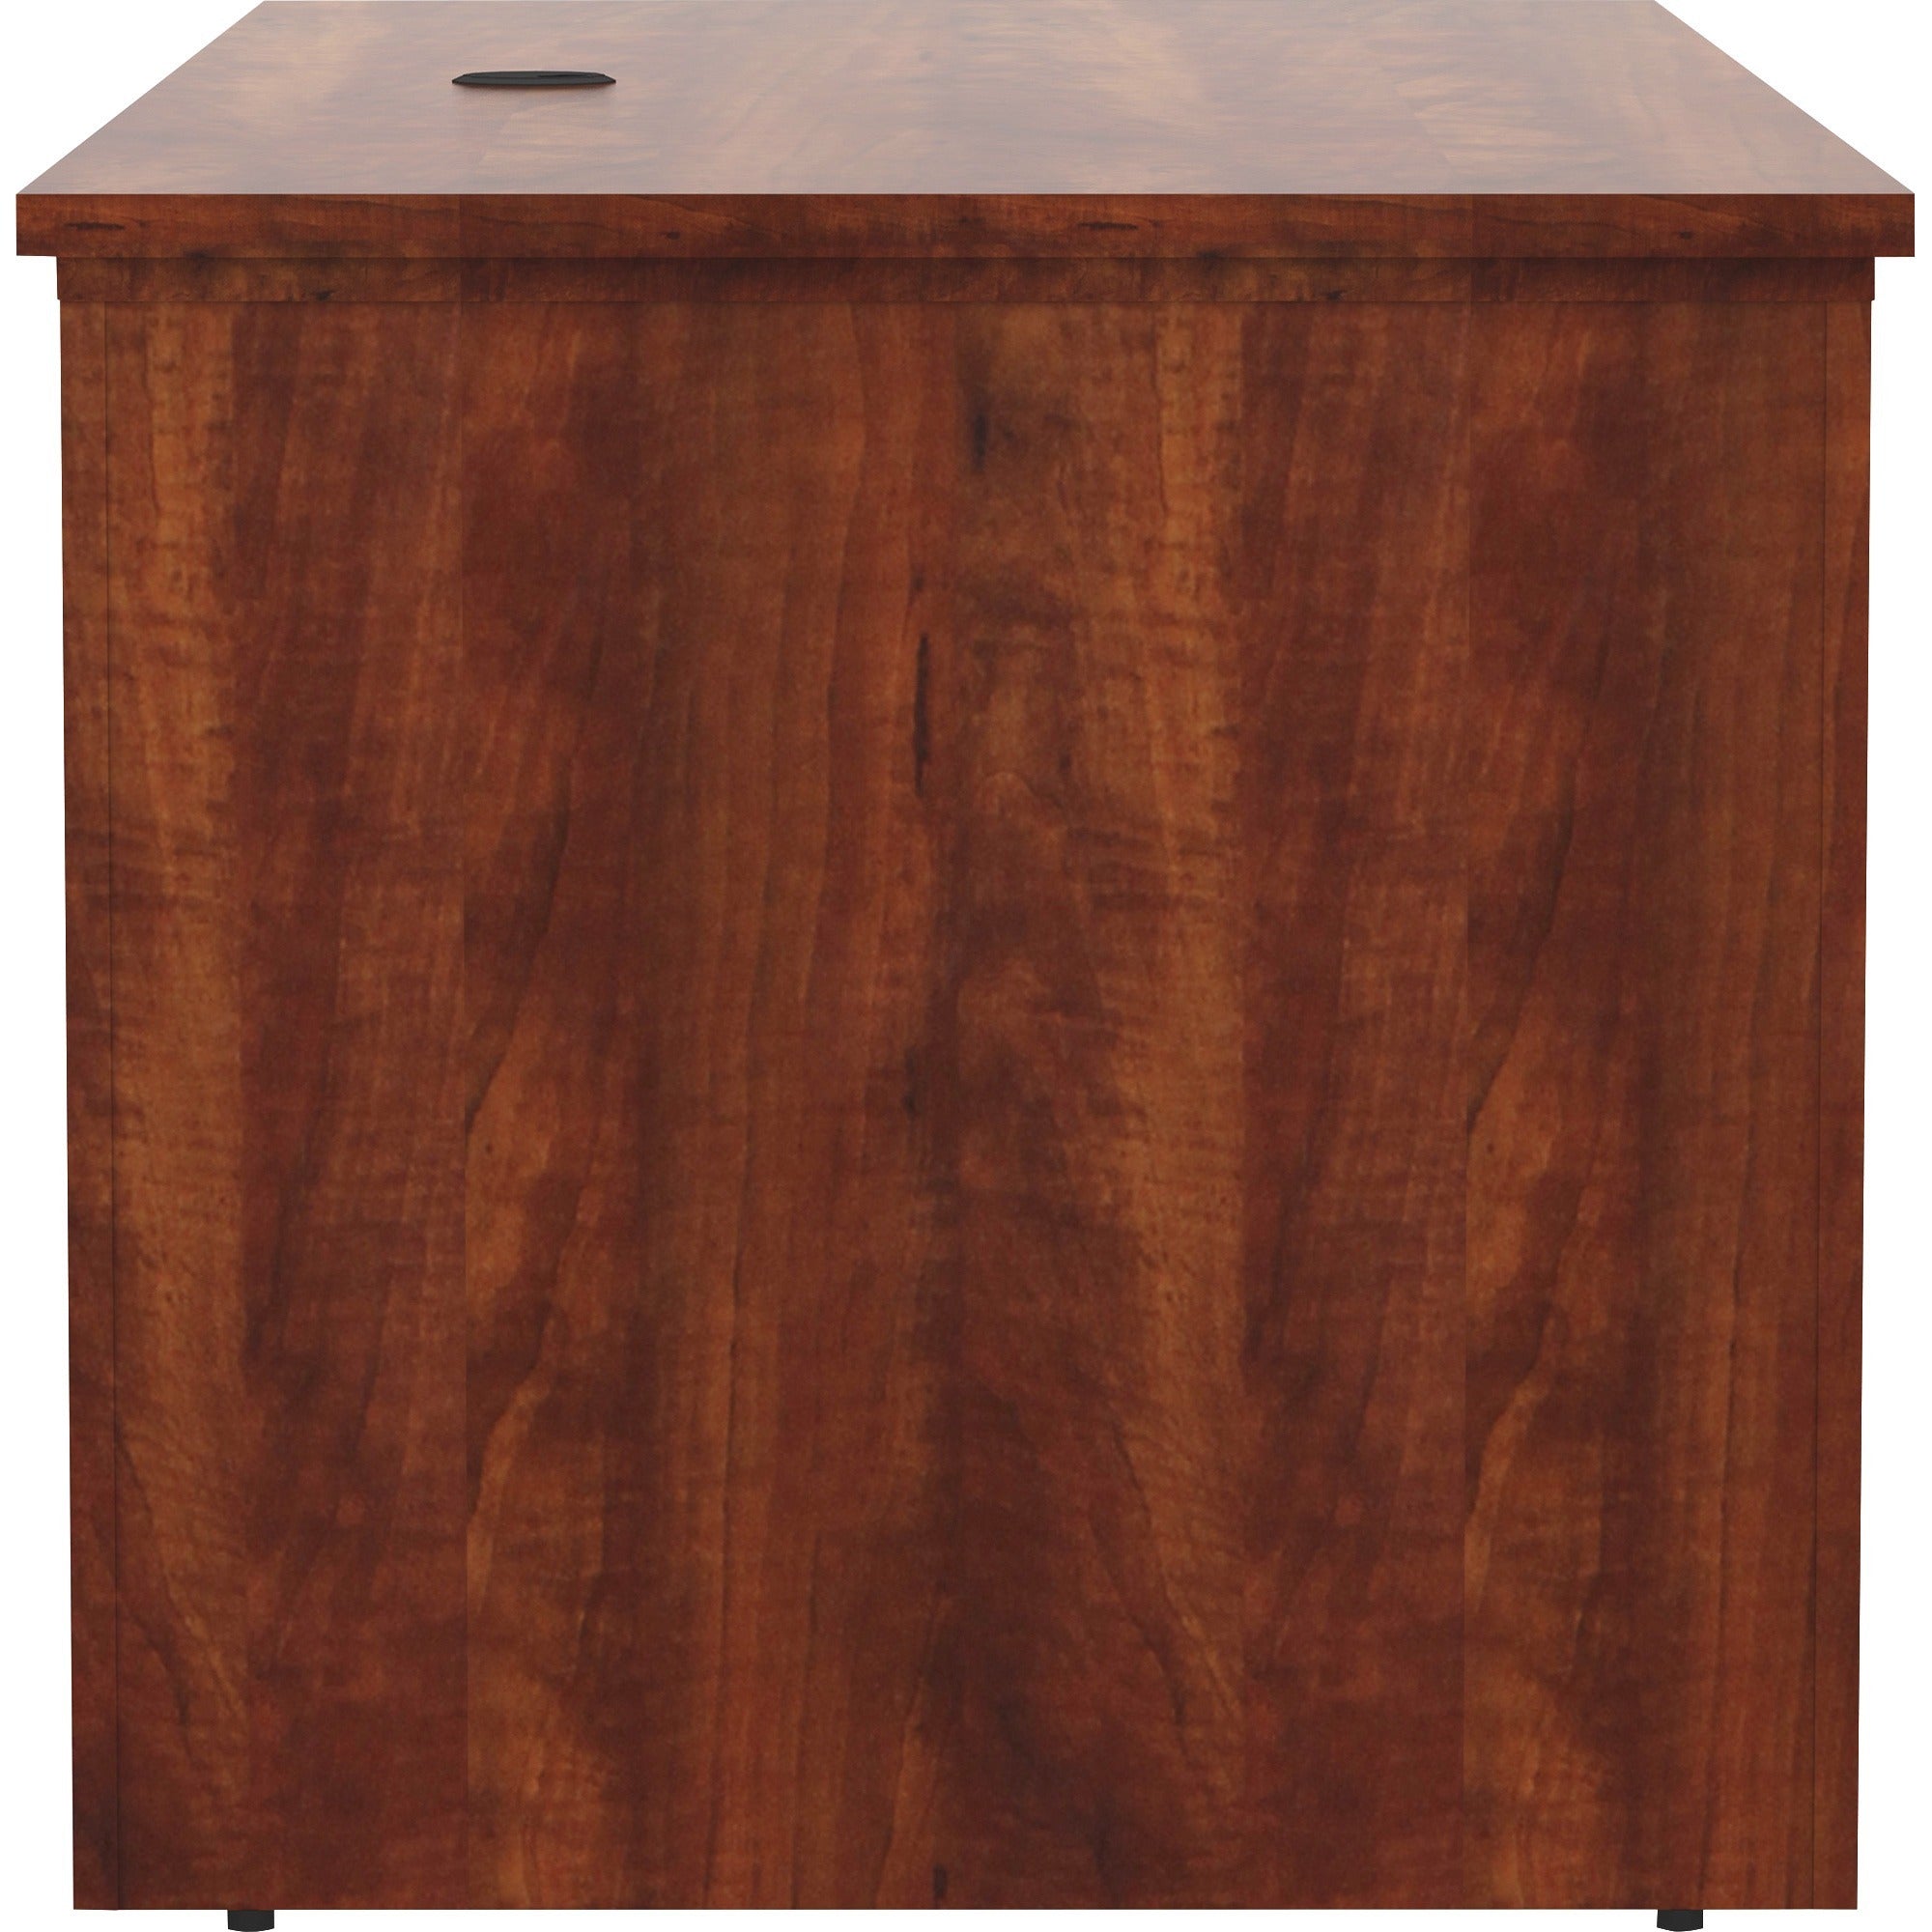 lorell-essentials-series-sit-to-stand-desk-shell-01-top-1-edge-72-x-2949-finish-cherry-laminate-table-top_llr69573 - 3